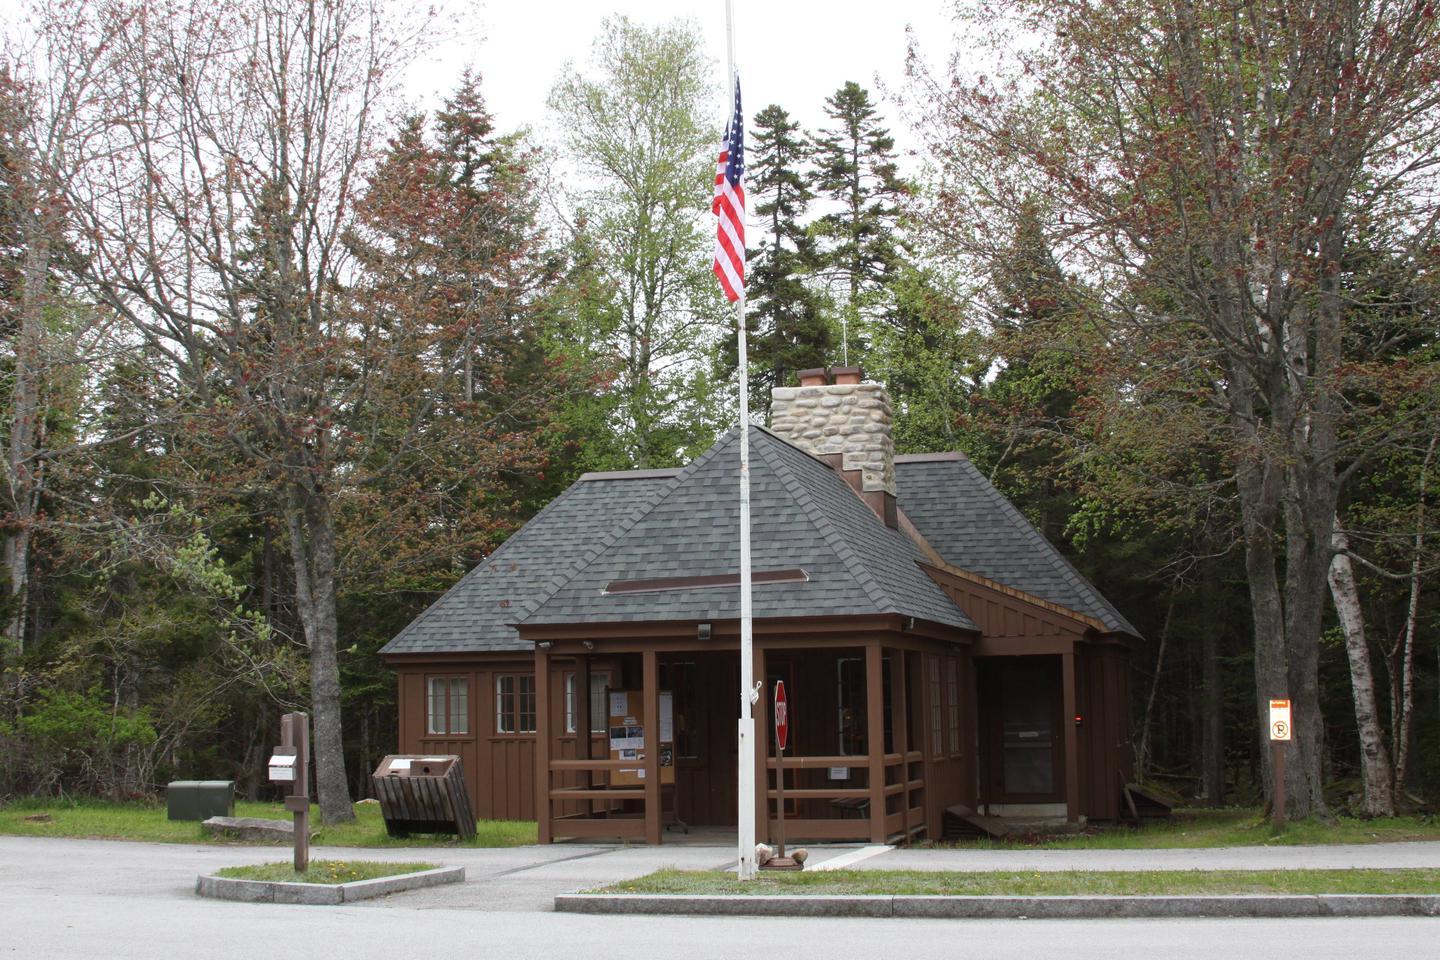 A wooden building with a flag pole and signs